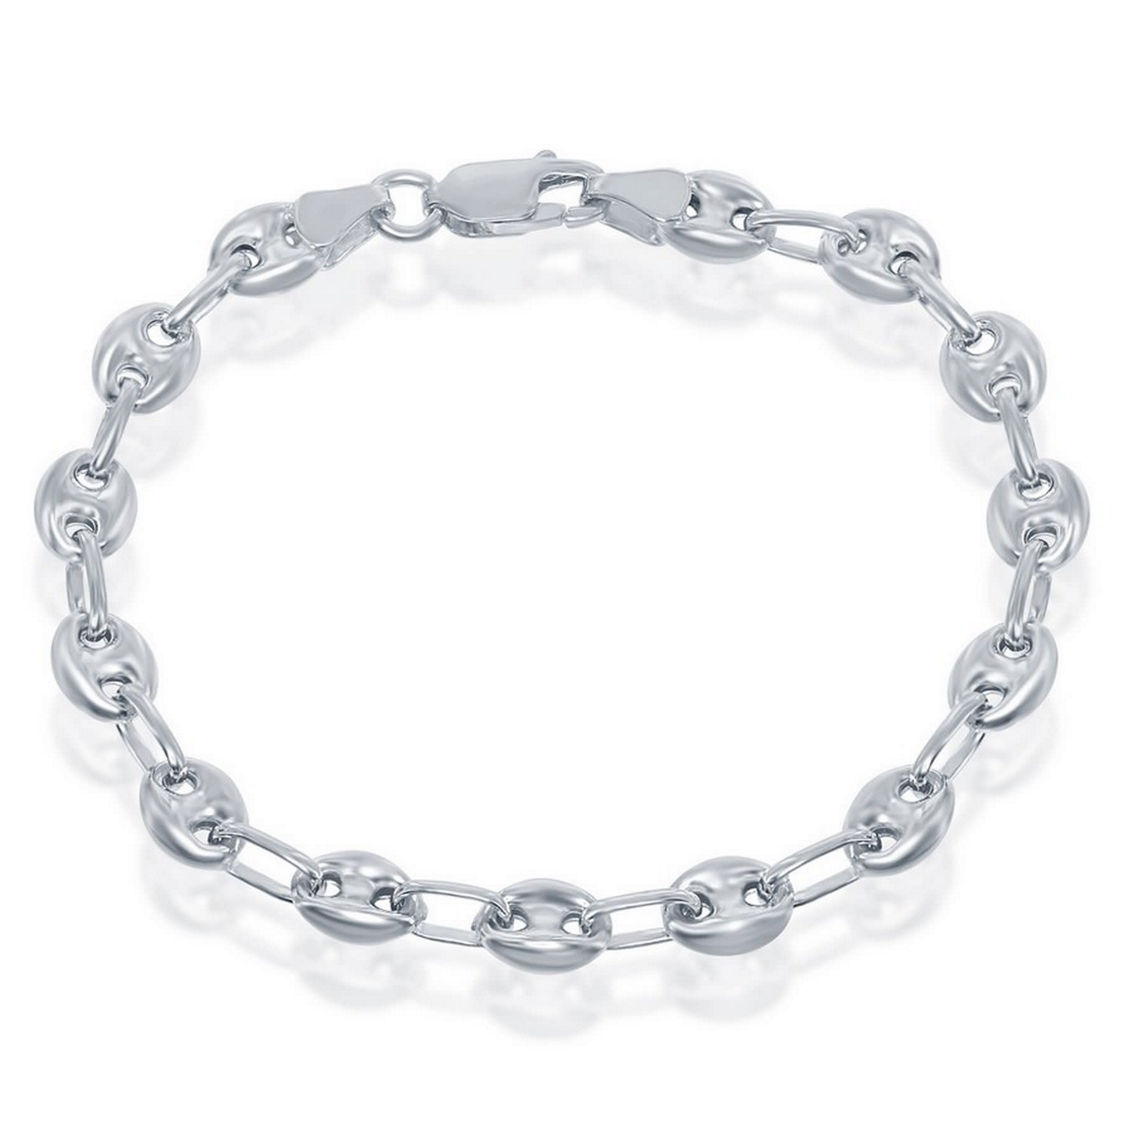 Links of Italy Sterling Silver 6mm Puffed Marina Chain - Rhodium Plated - Image 2 of 3